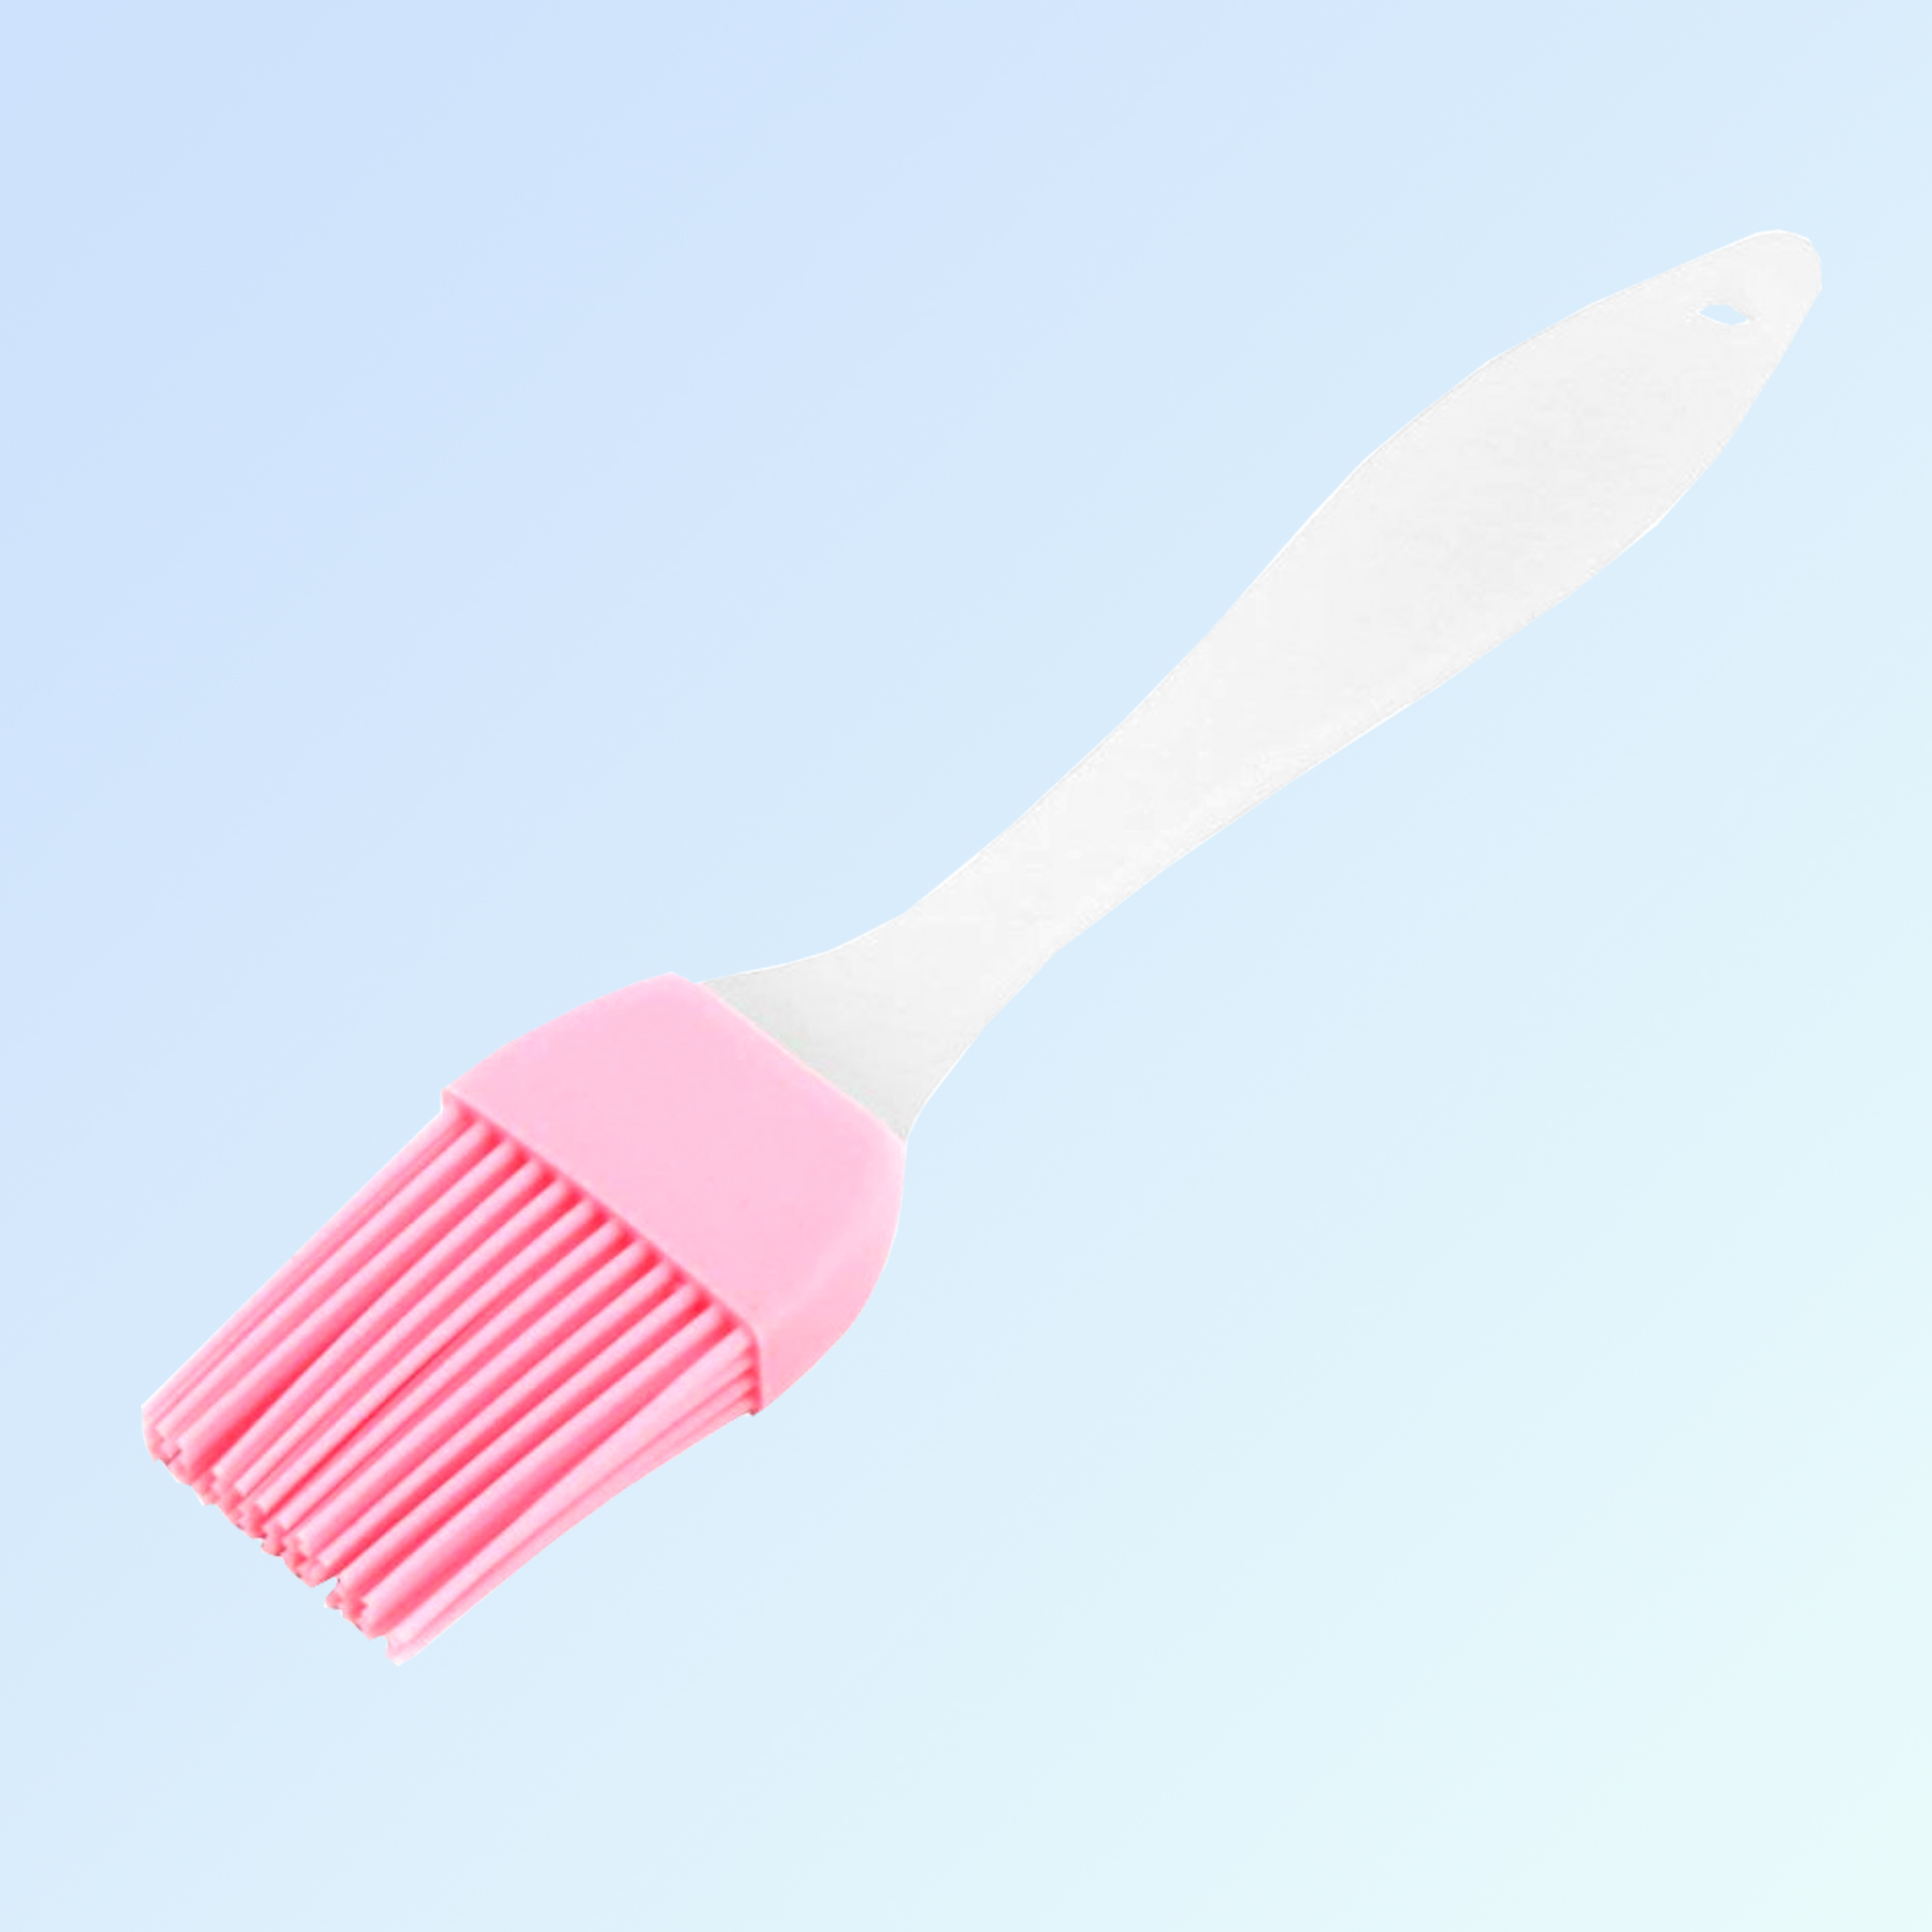 OIL BRUSH FOR COOKING